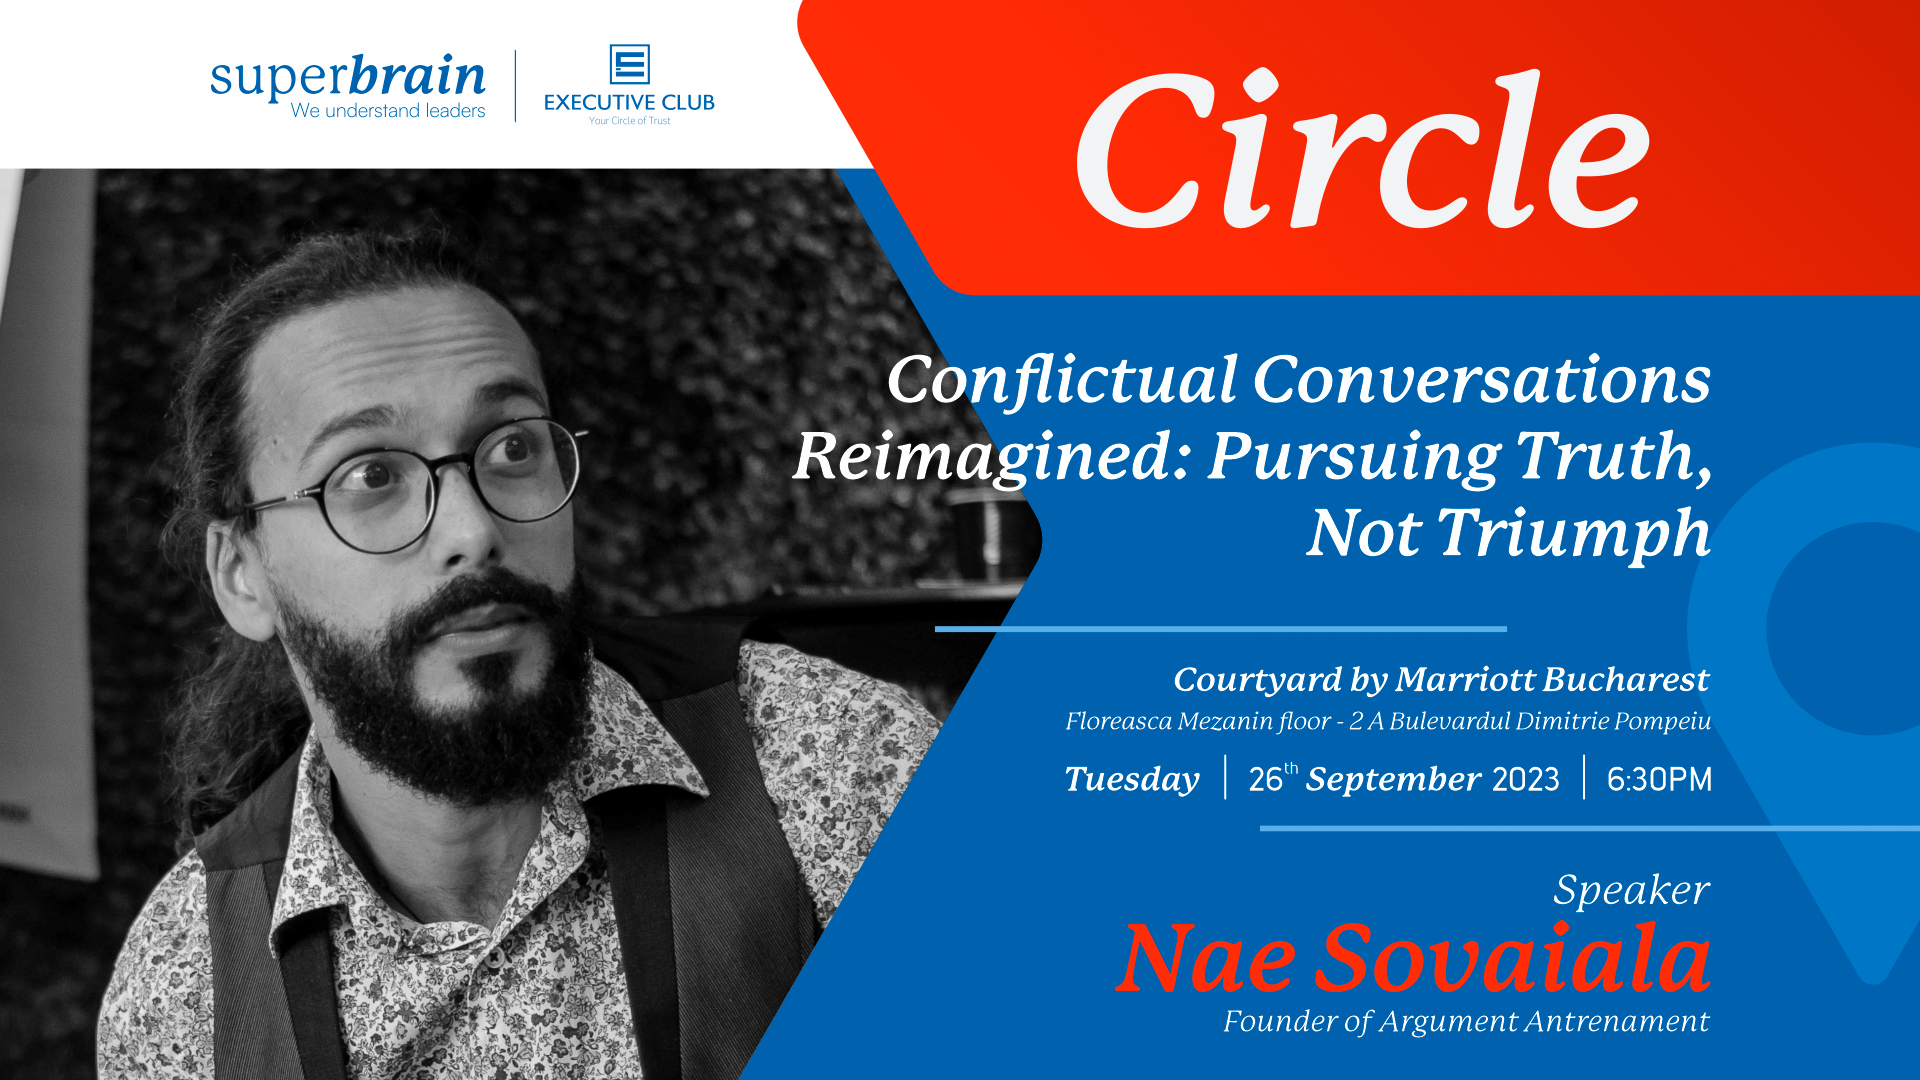 Executive Club Circle - Conflictual Conversations Reimagined: Pursuing Truth, Not Triumph